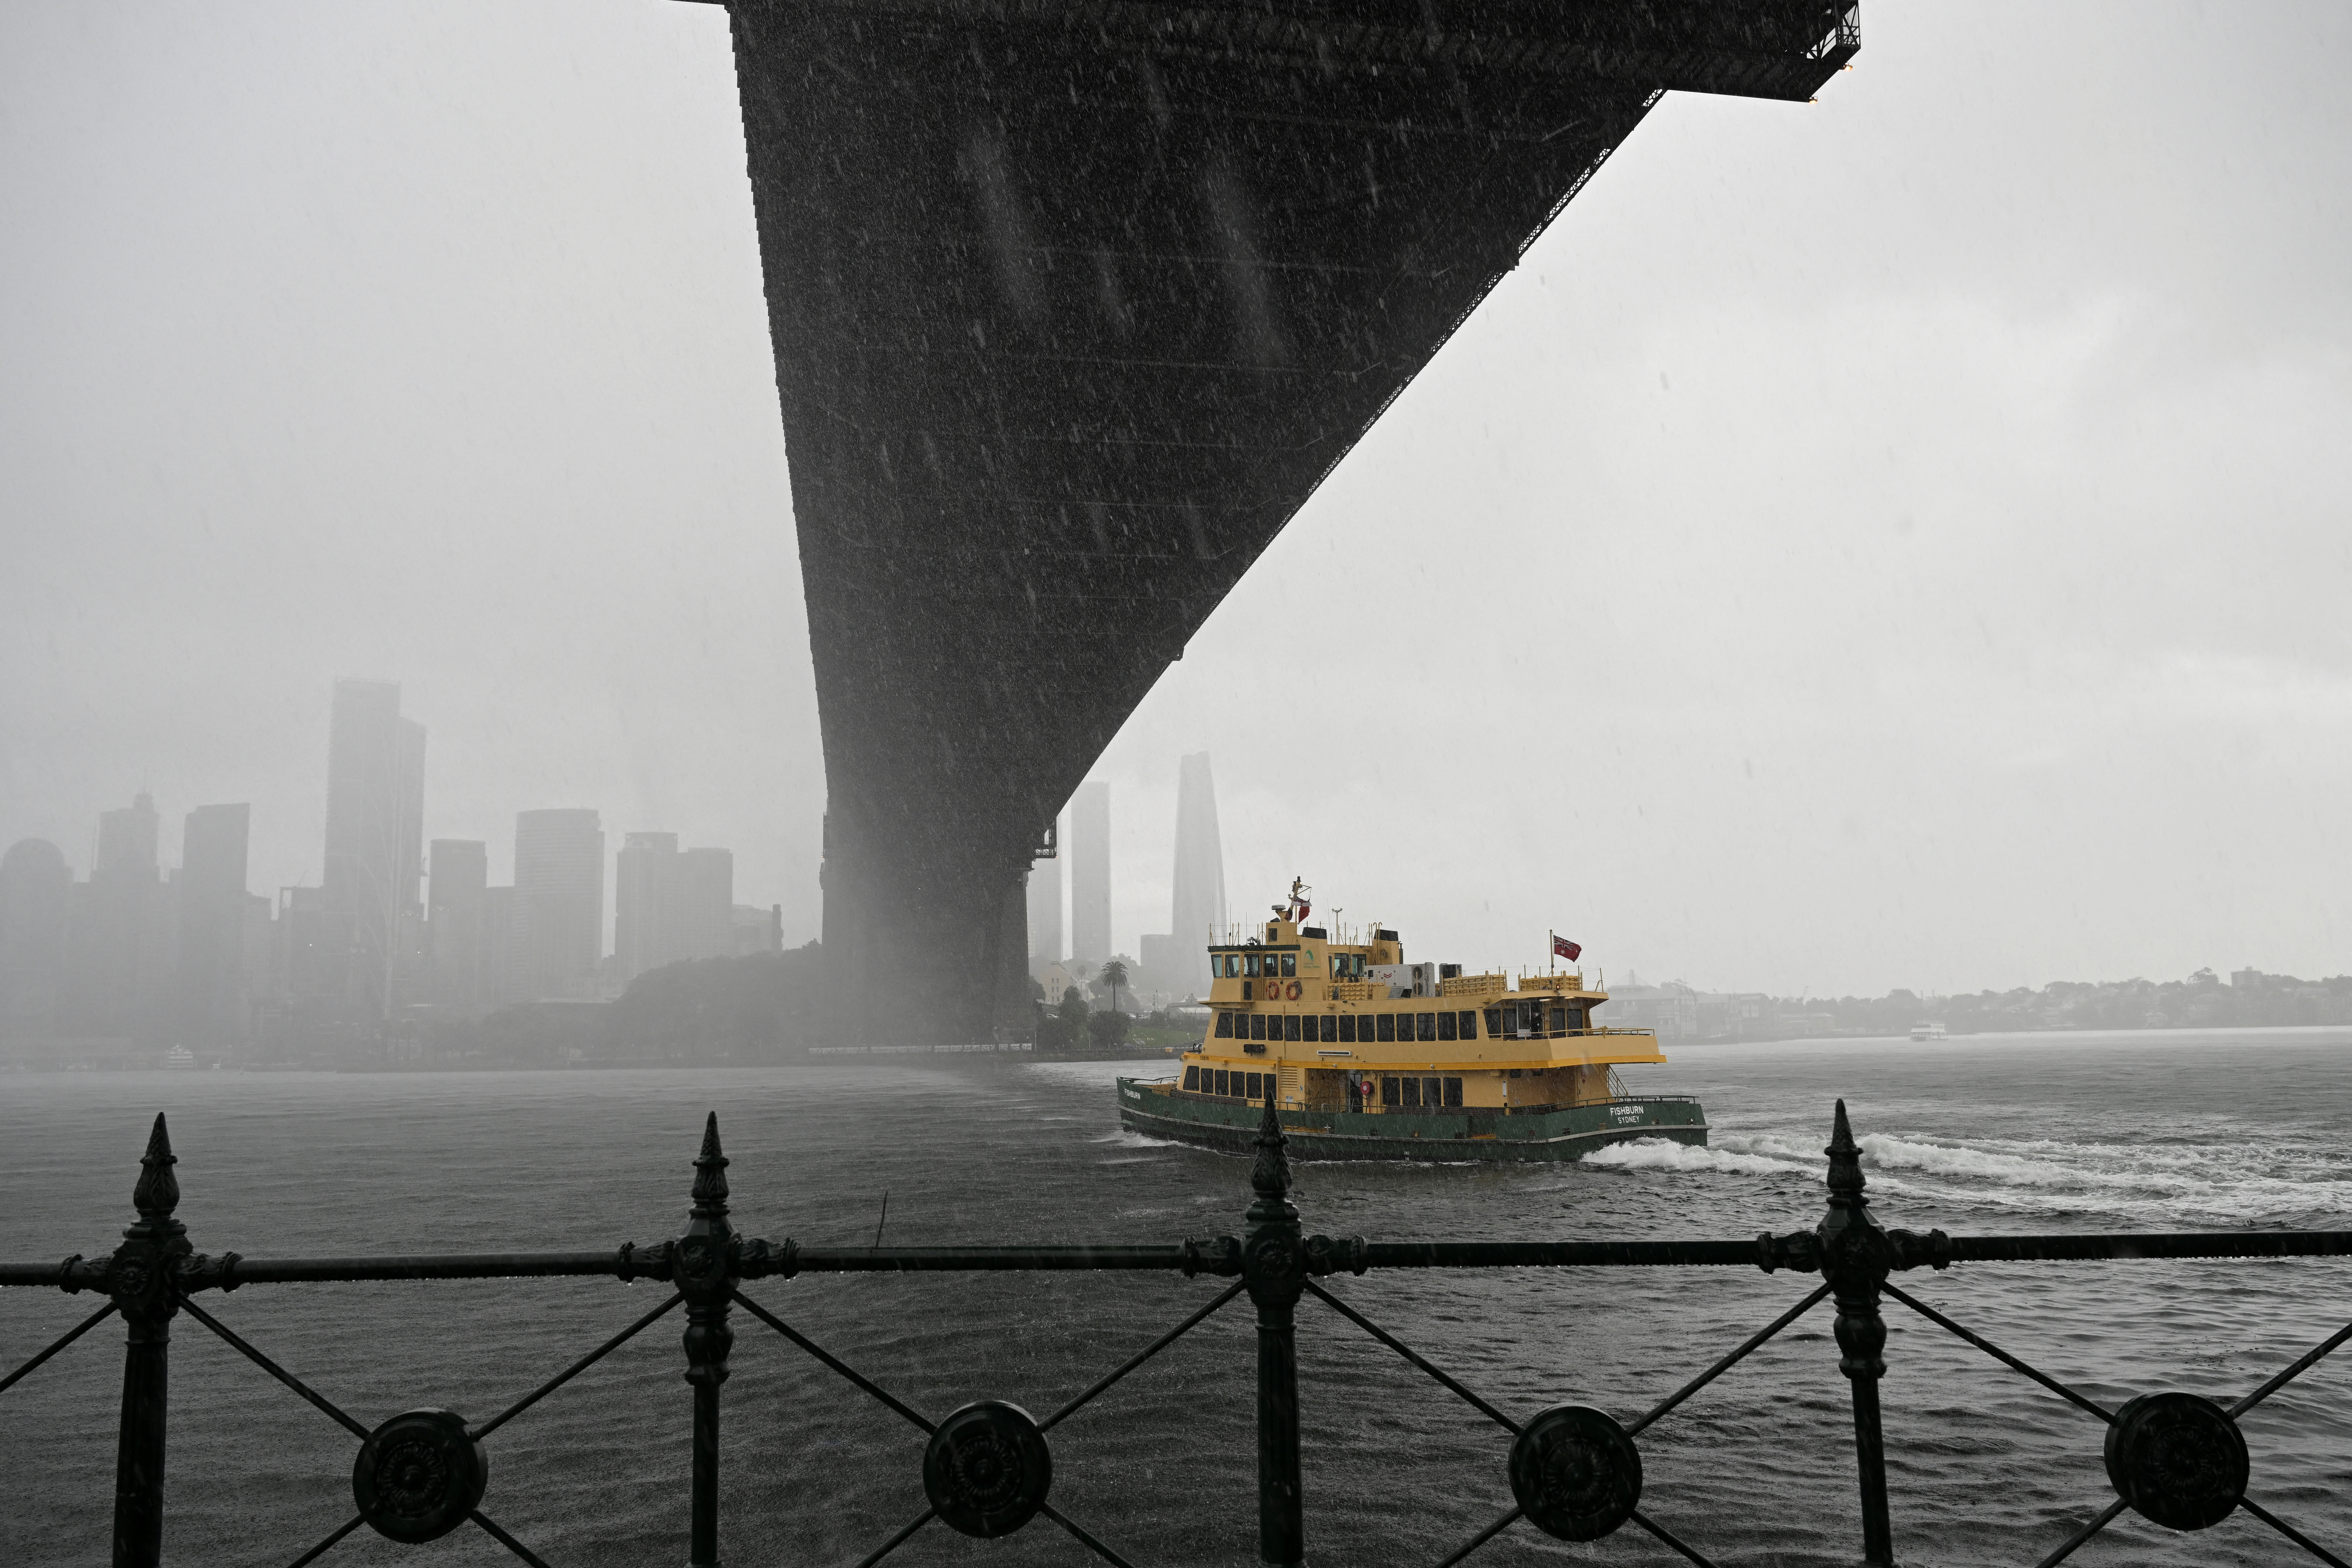 Days of consecutive rainy weather conditions affect Sydney